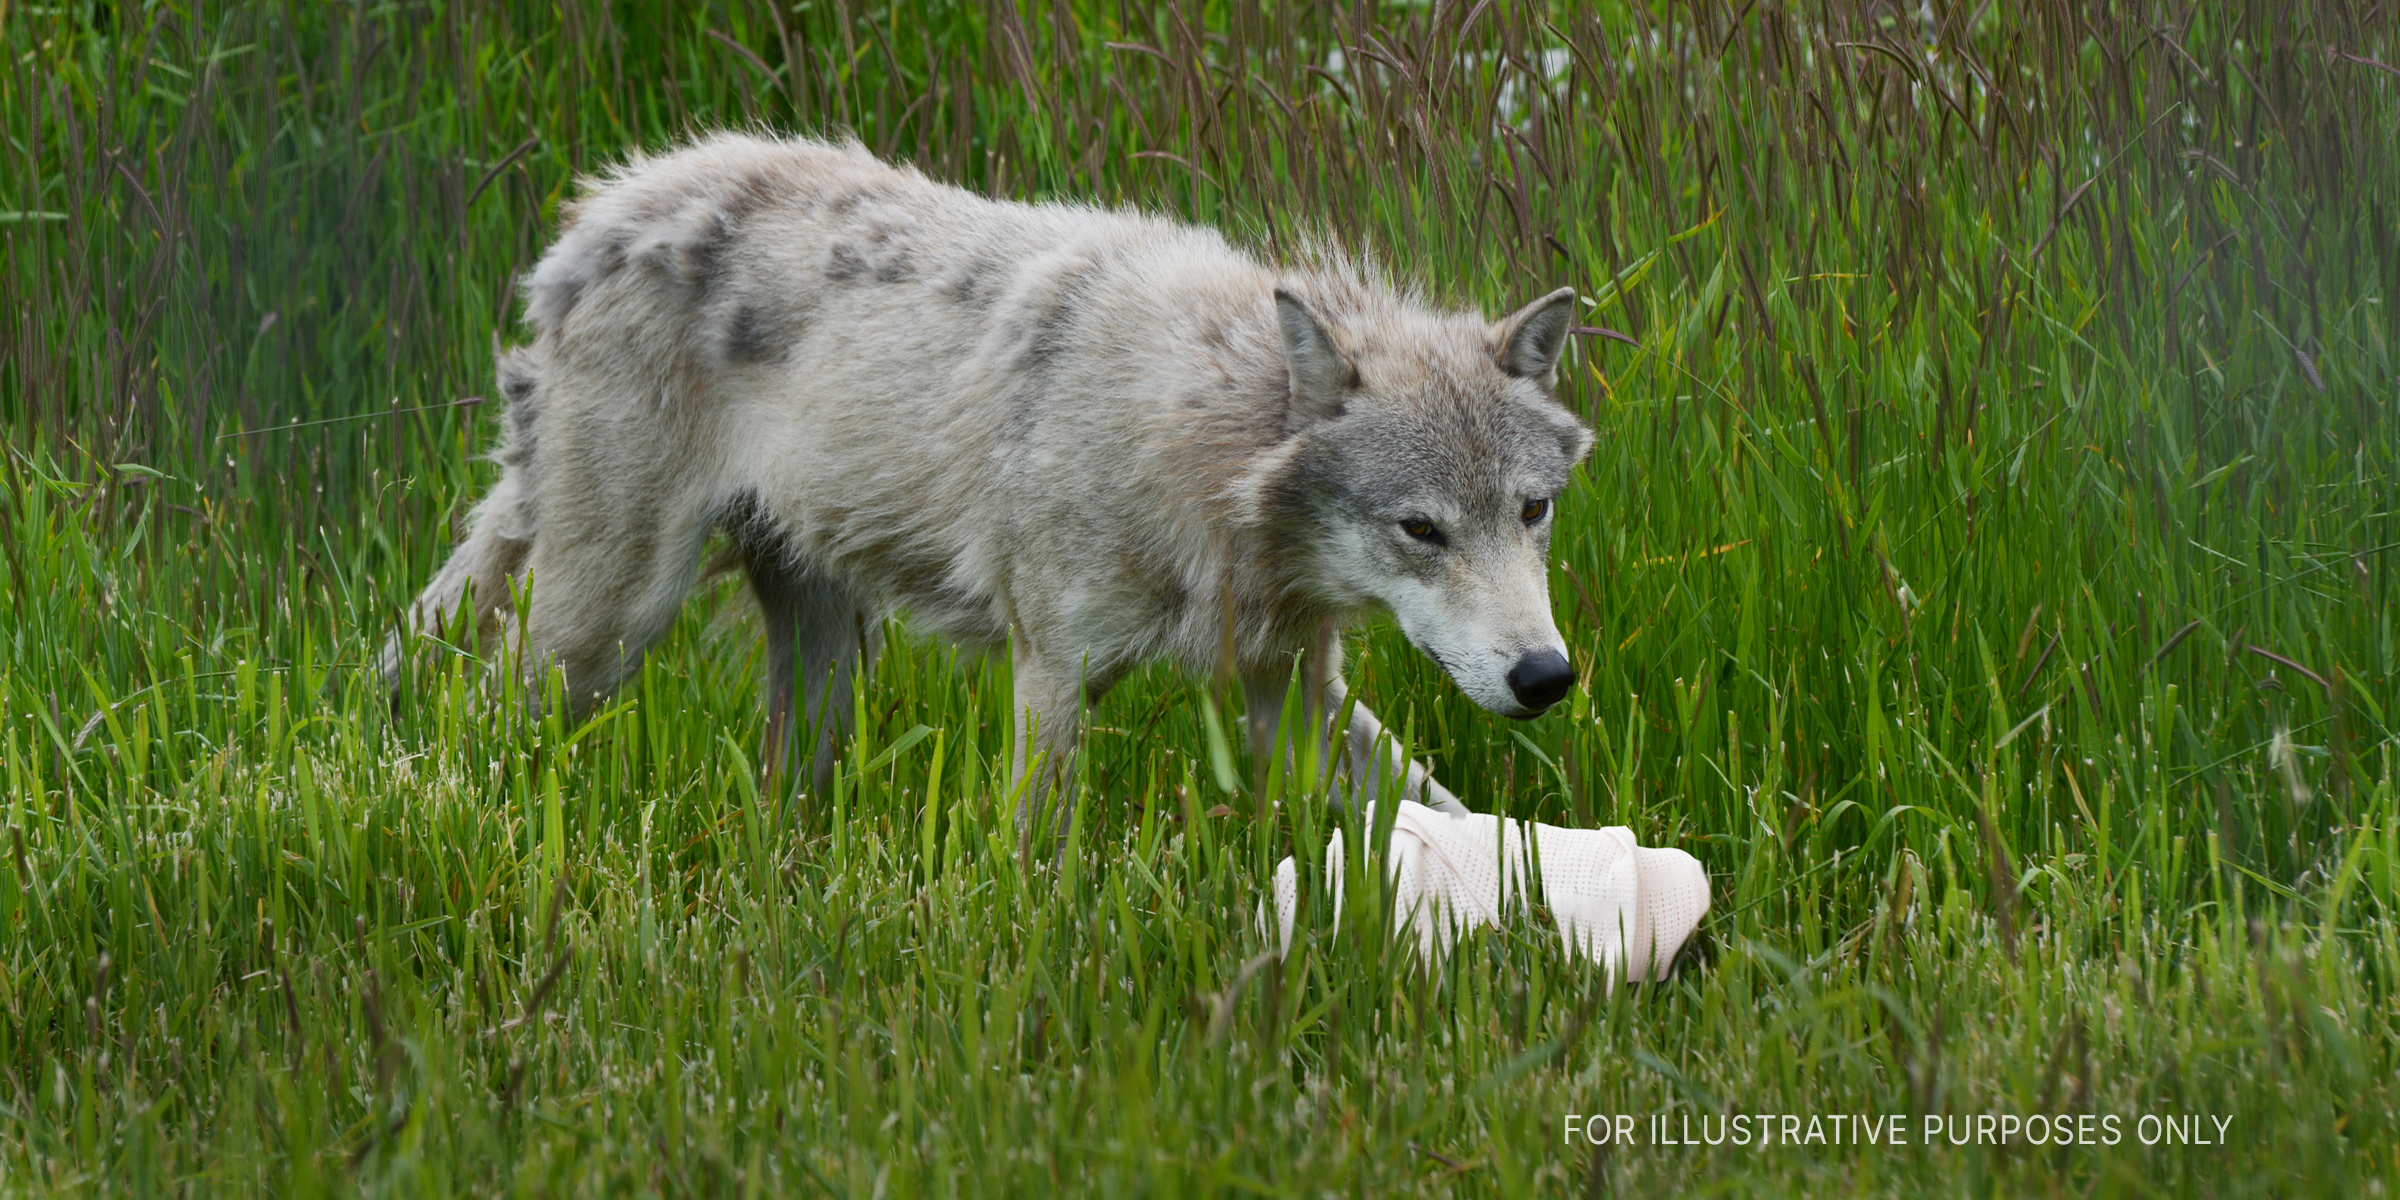 A white wolf stands over a swaddled baby | Source: Flickr / generalising (CC BY-SA 2.0) Shutterstock